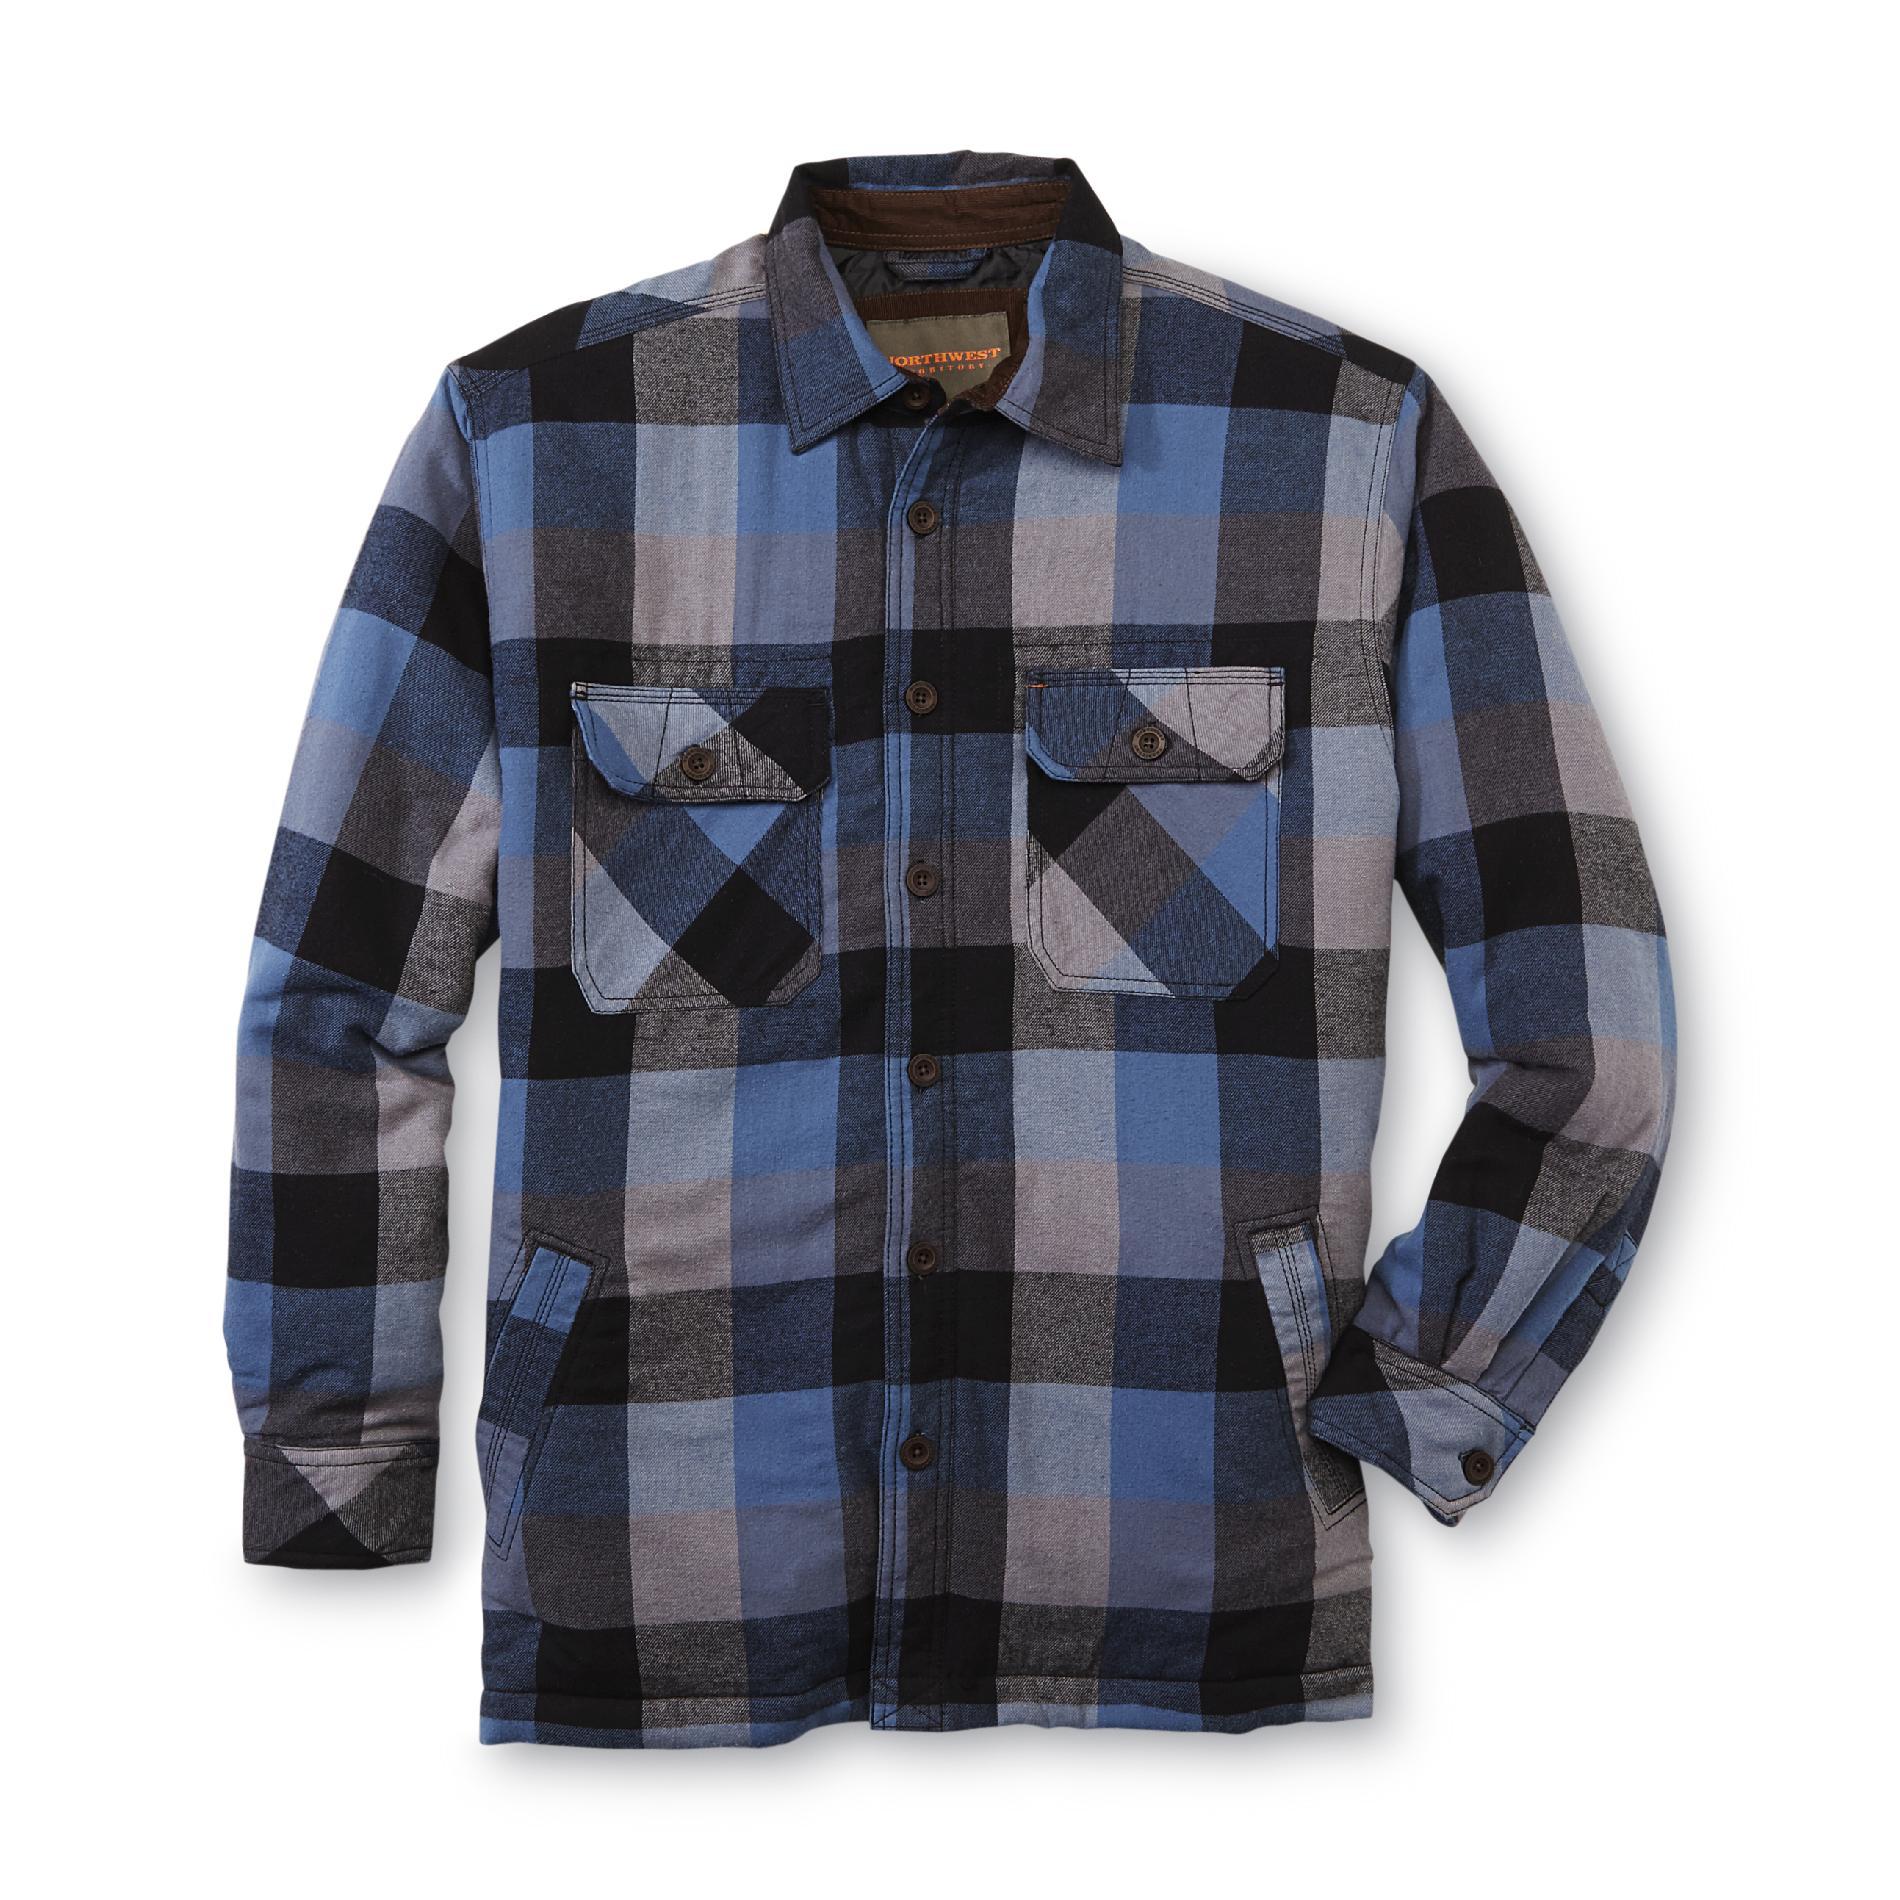 Northwest Territory Men's Big & Tall Quilted Flannel Shirt Jacket - Plaid